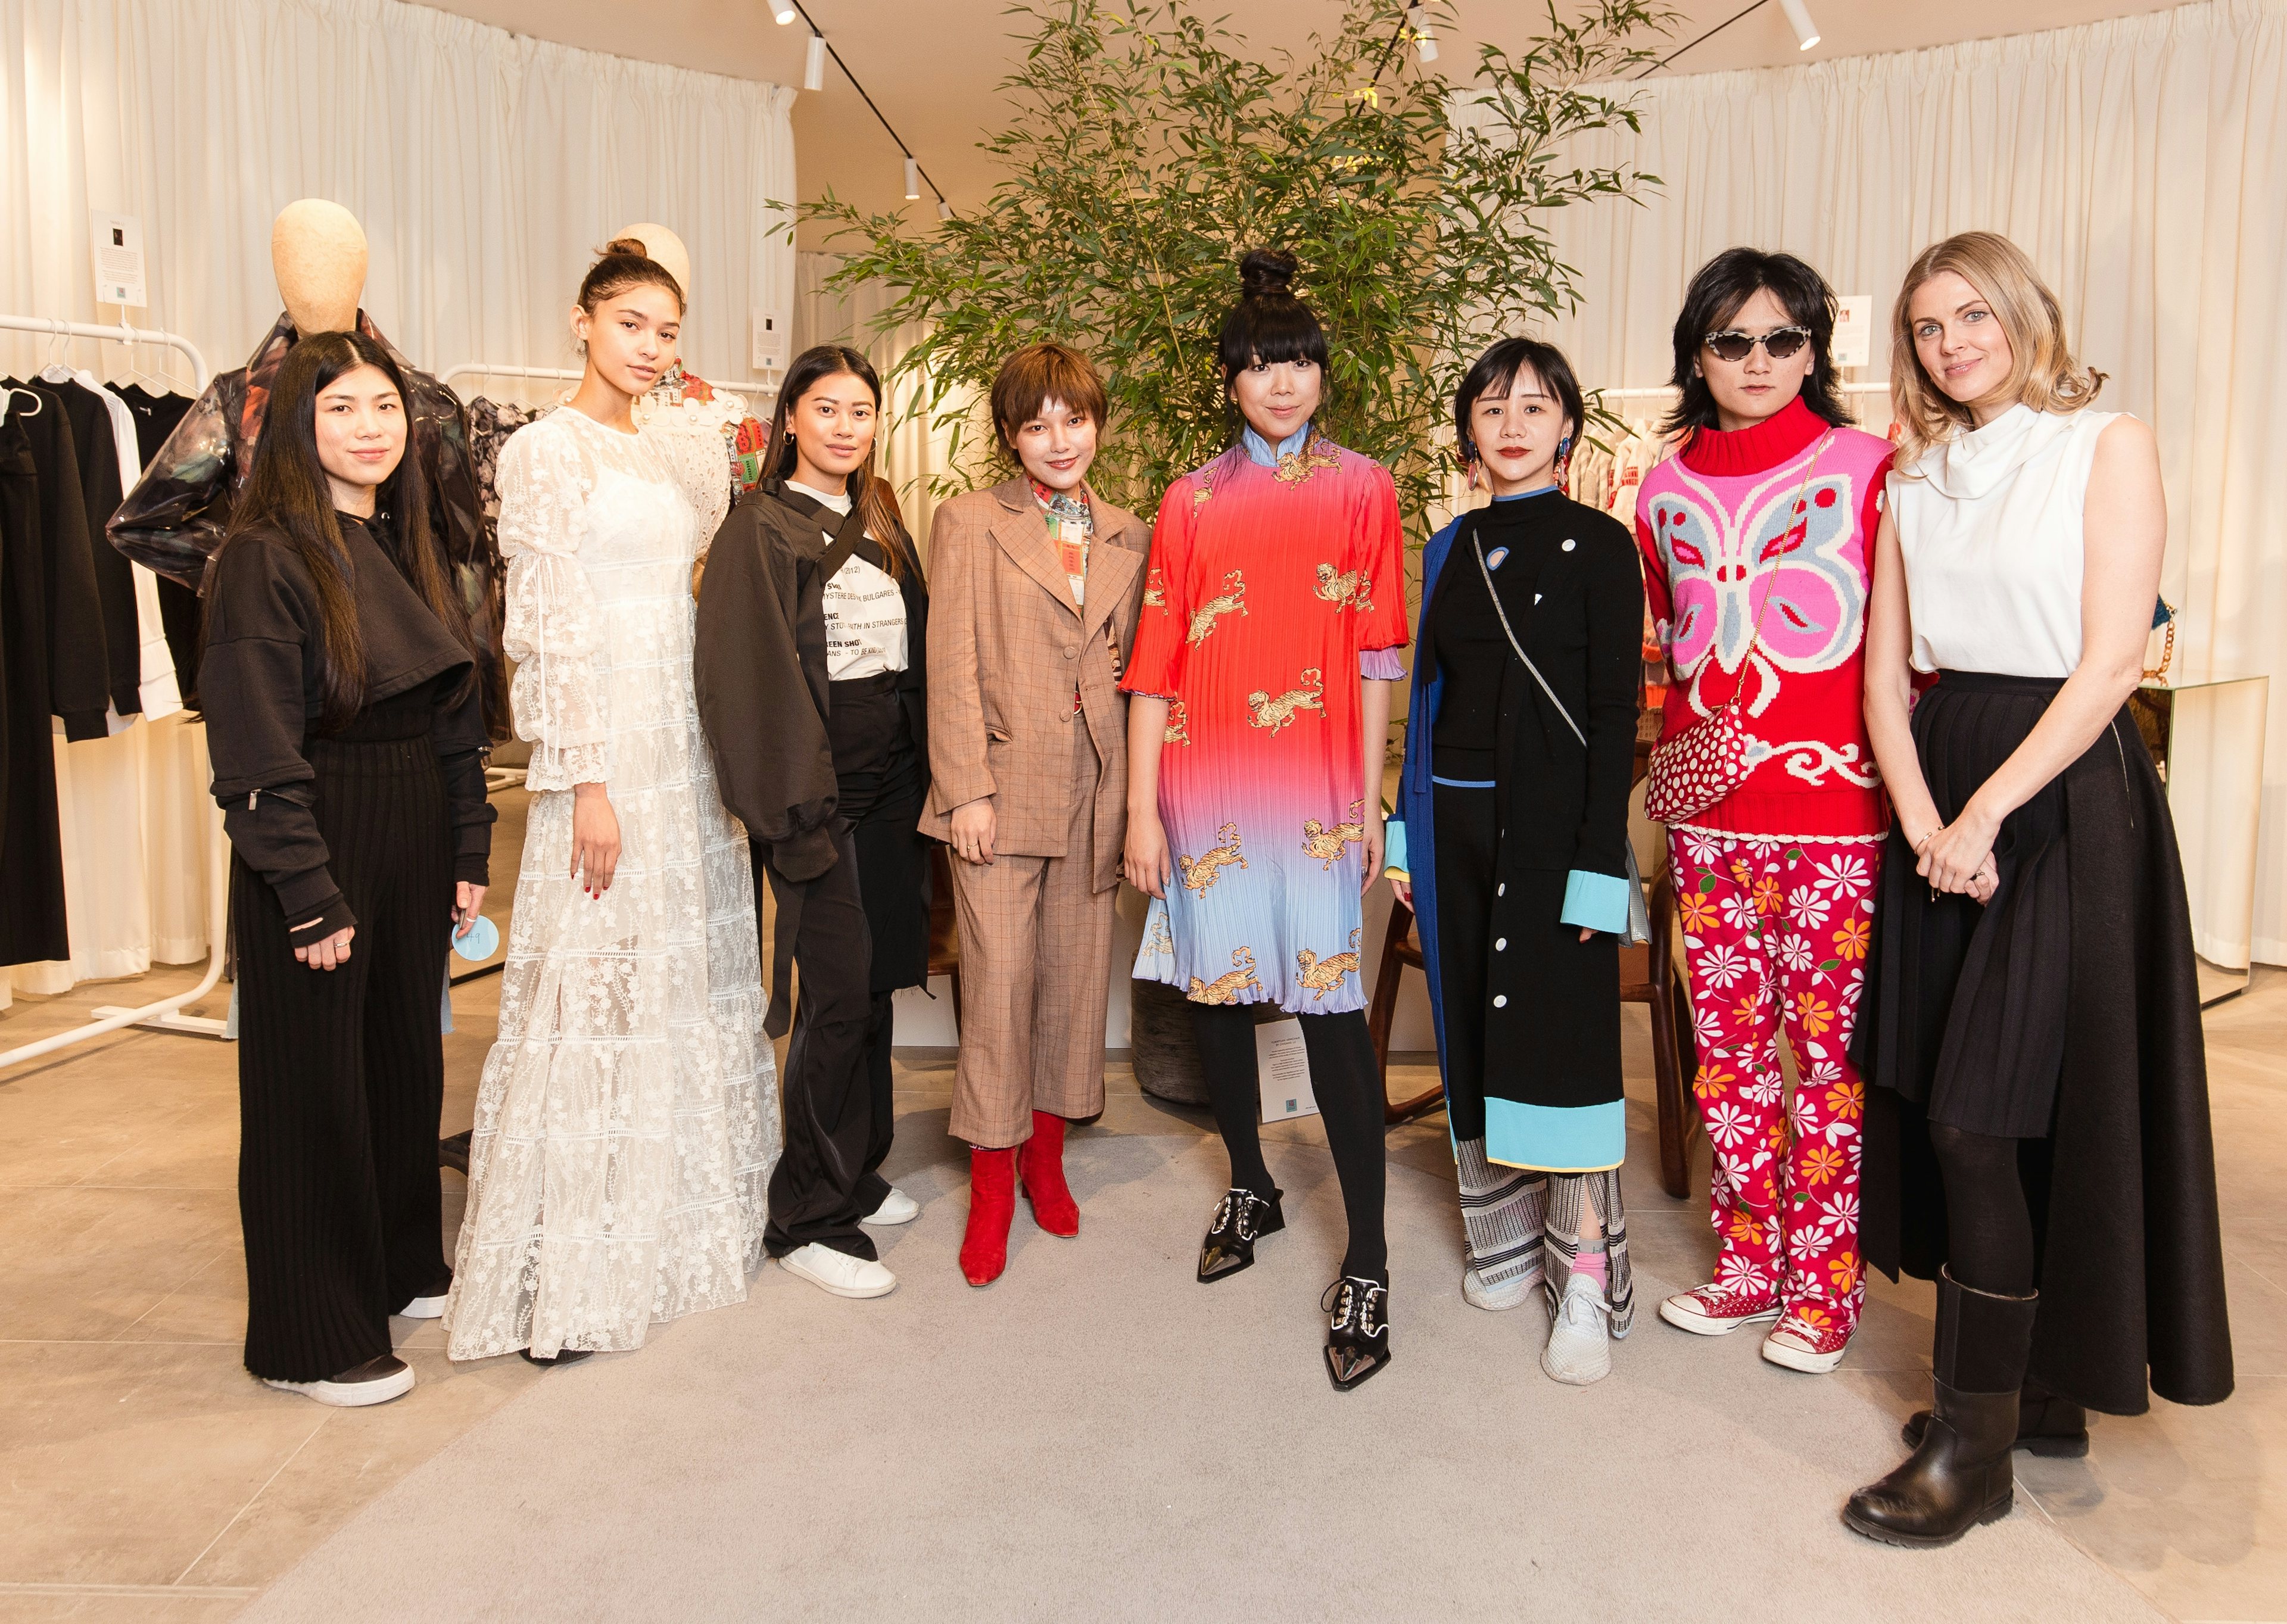 Susie Bubble’s pop-up is curated just for this crowd, showcasing the work of ten emerging Chinese designers, including former winner of the BFC Fashion Trust Award and an LVMH award finalist Huishan Zhang, Marie Yat, I-Am-Chen, and Snow Xue Gao. Courtesy image